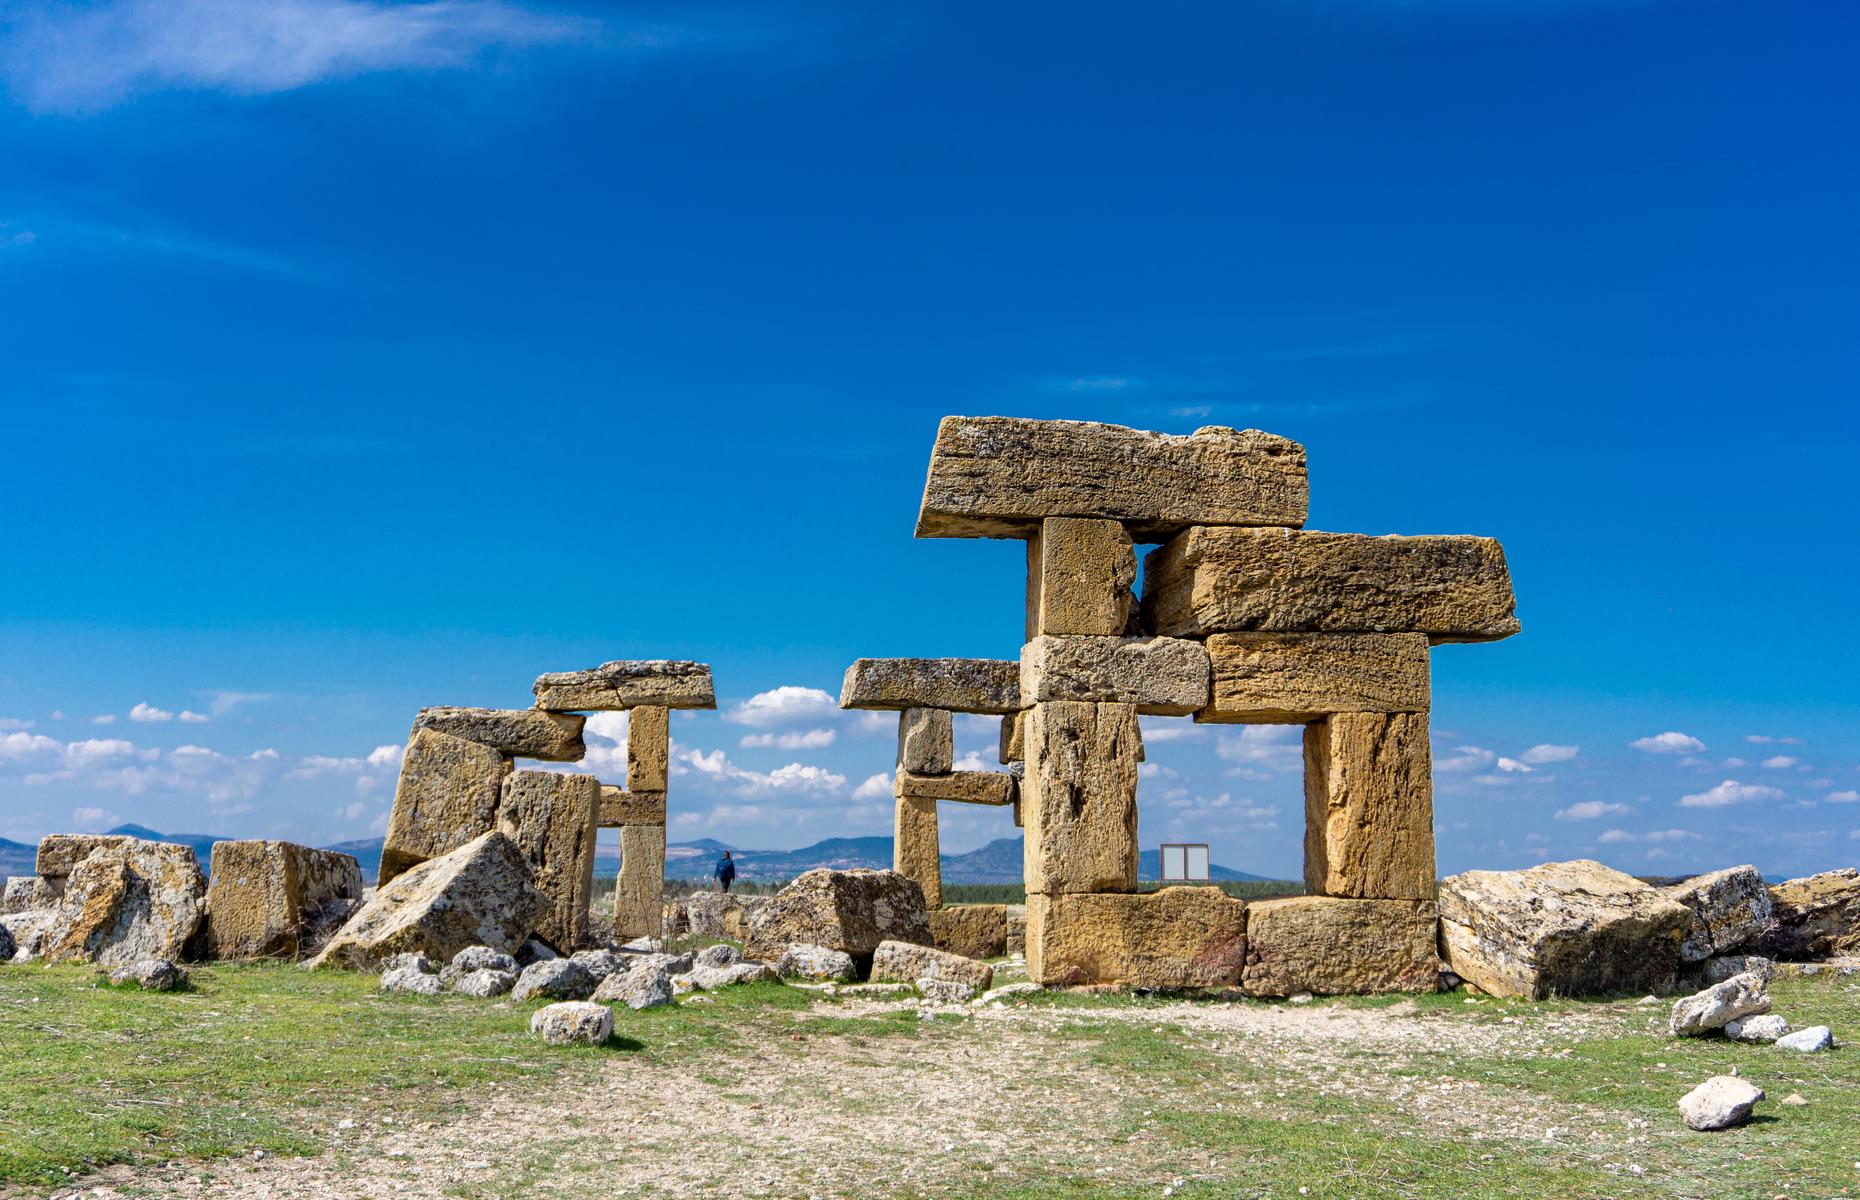 <p><a href="https://www.smithsonianmag.com/smart-news/turkish-archaeologists-excavate-rock-cut-tombs-in-ancient-city-180978877/">An extraordinary and extensive network of rock-cut chamber tombs</a> was uncovered in October 2021 by archaeologists working at the ancient city of Blaundos near Uşak in Turkey. The team found 400 tombs that had been cut into the steep side of a canyon around 1,800 years ago. Many of them have multiple remains and feature intricate wall paintings, detailing vines, flowers, mythological figures and geometric patterns, as well as pottery and artefacts. Founded at the time of Alexander the Great, the ancient centre of Blaundos later became an important Roman city in Asia Minor.</p>